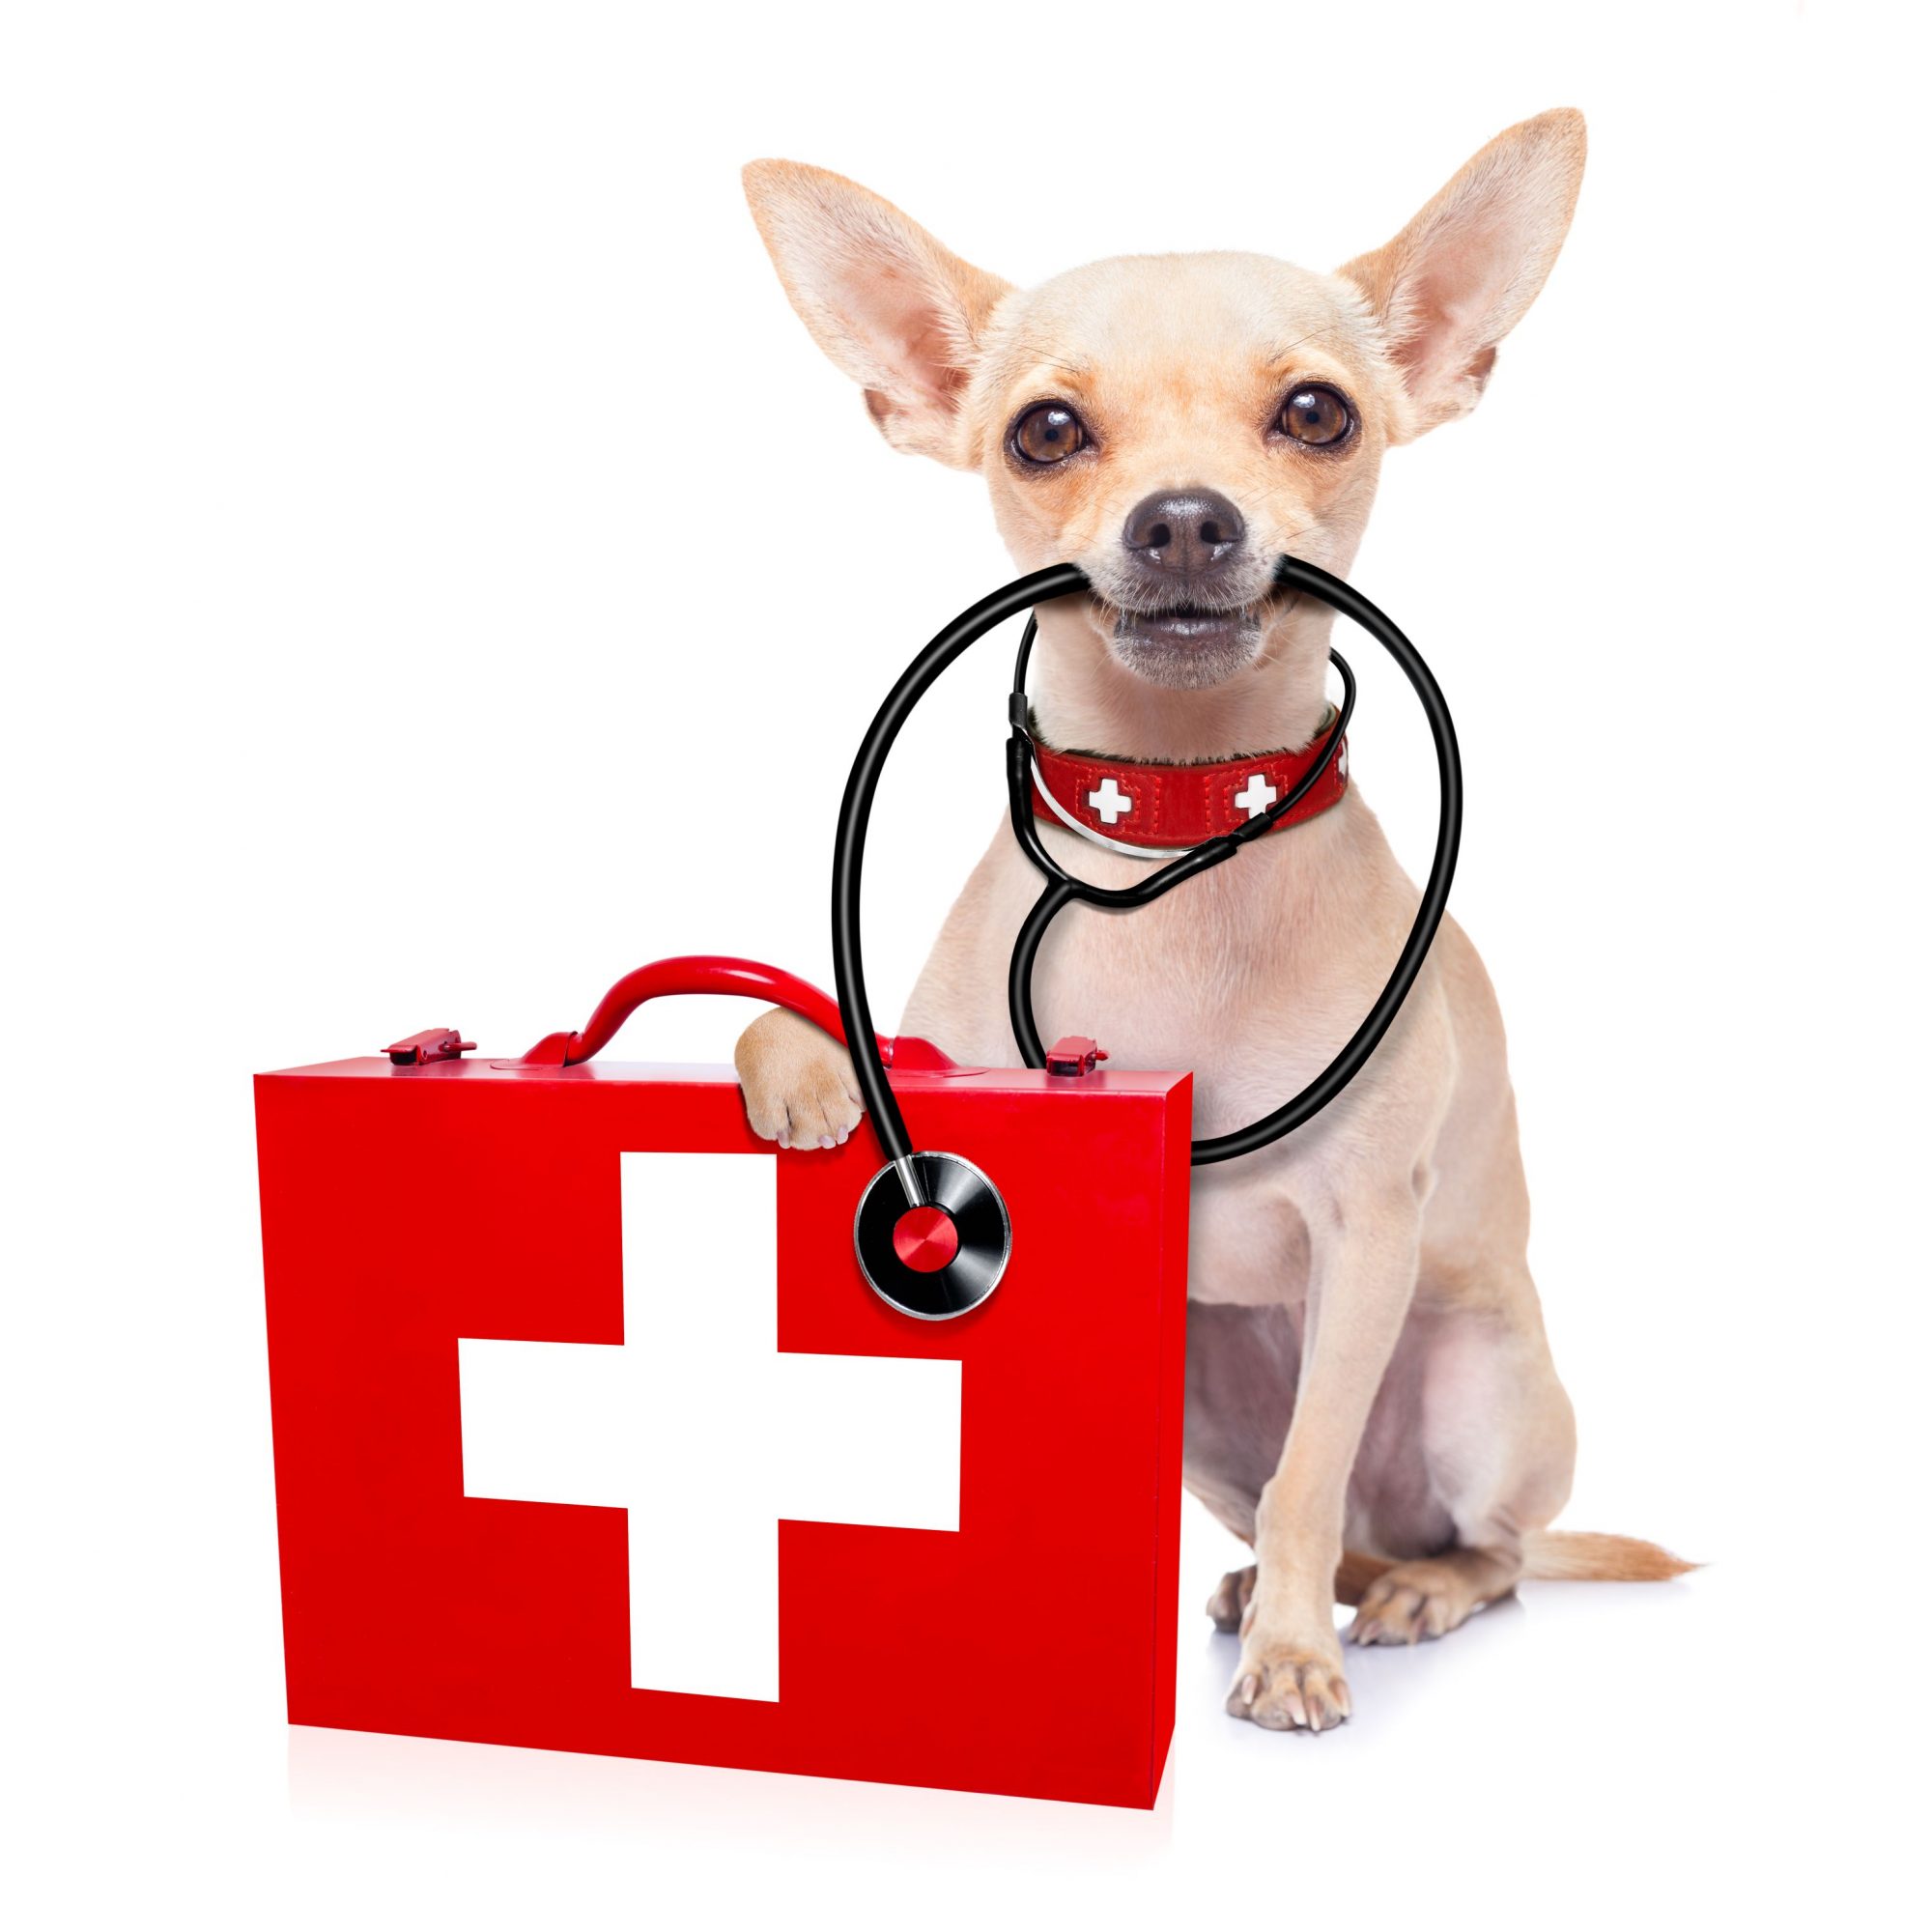 Chihuahua with medical equipment.